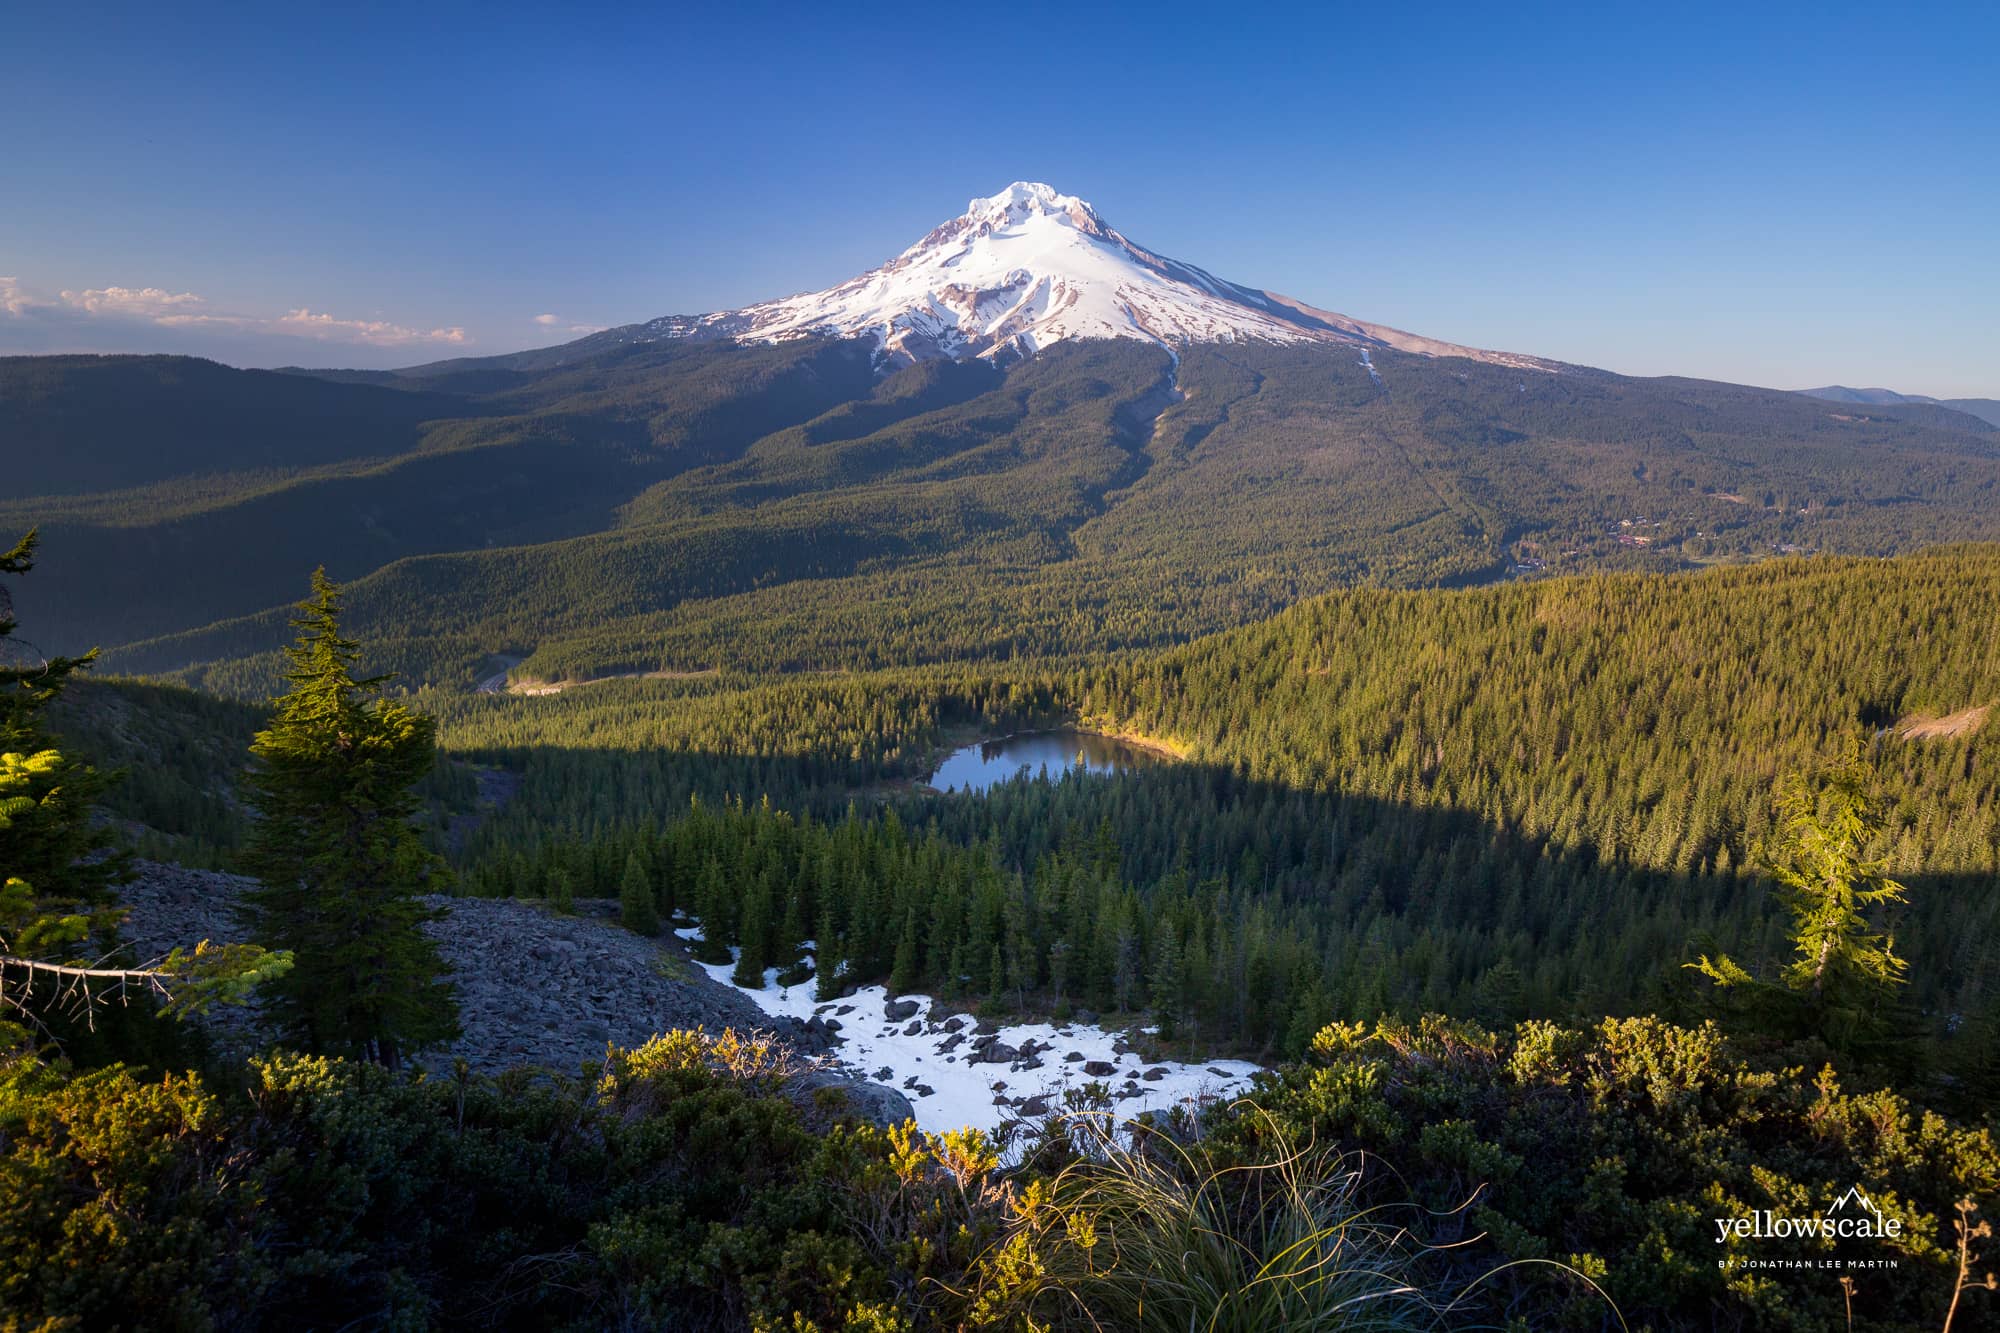 Mt. Hood from Tom Dick and Harry Mountain, Oregon